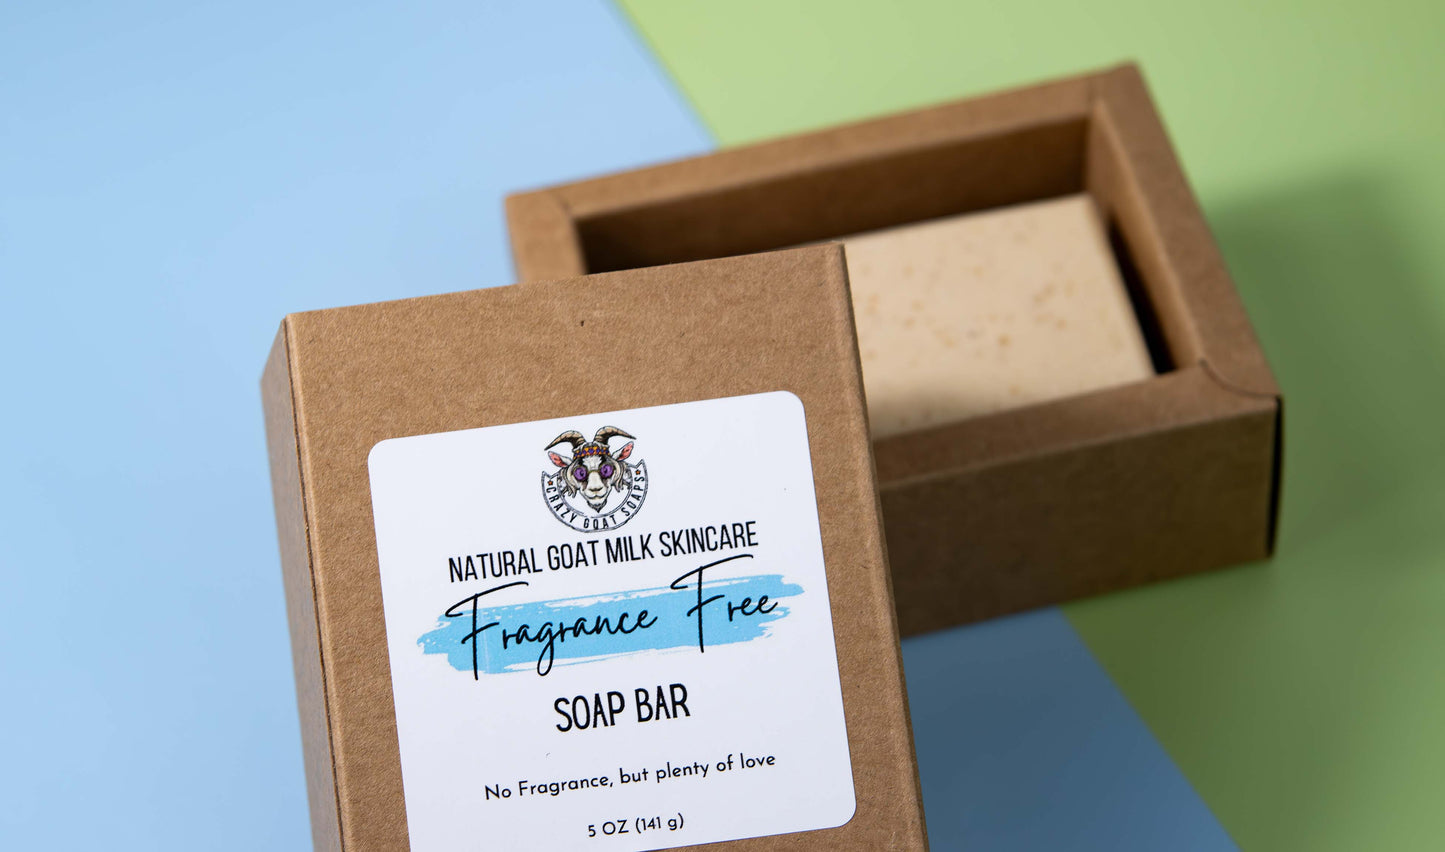 Our Unscented Goat Milk Soap Bar comes packaged and fully labeled.